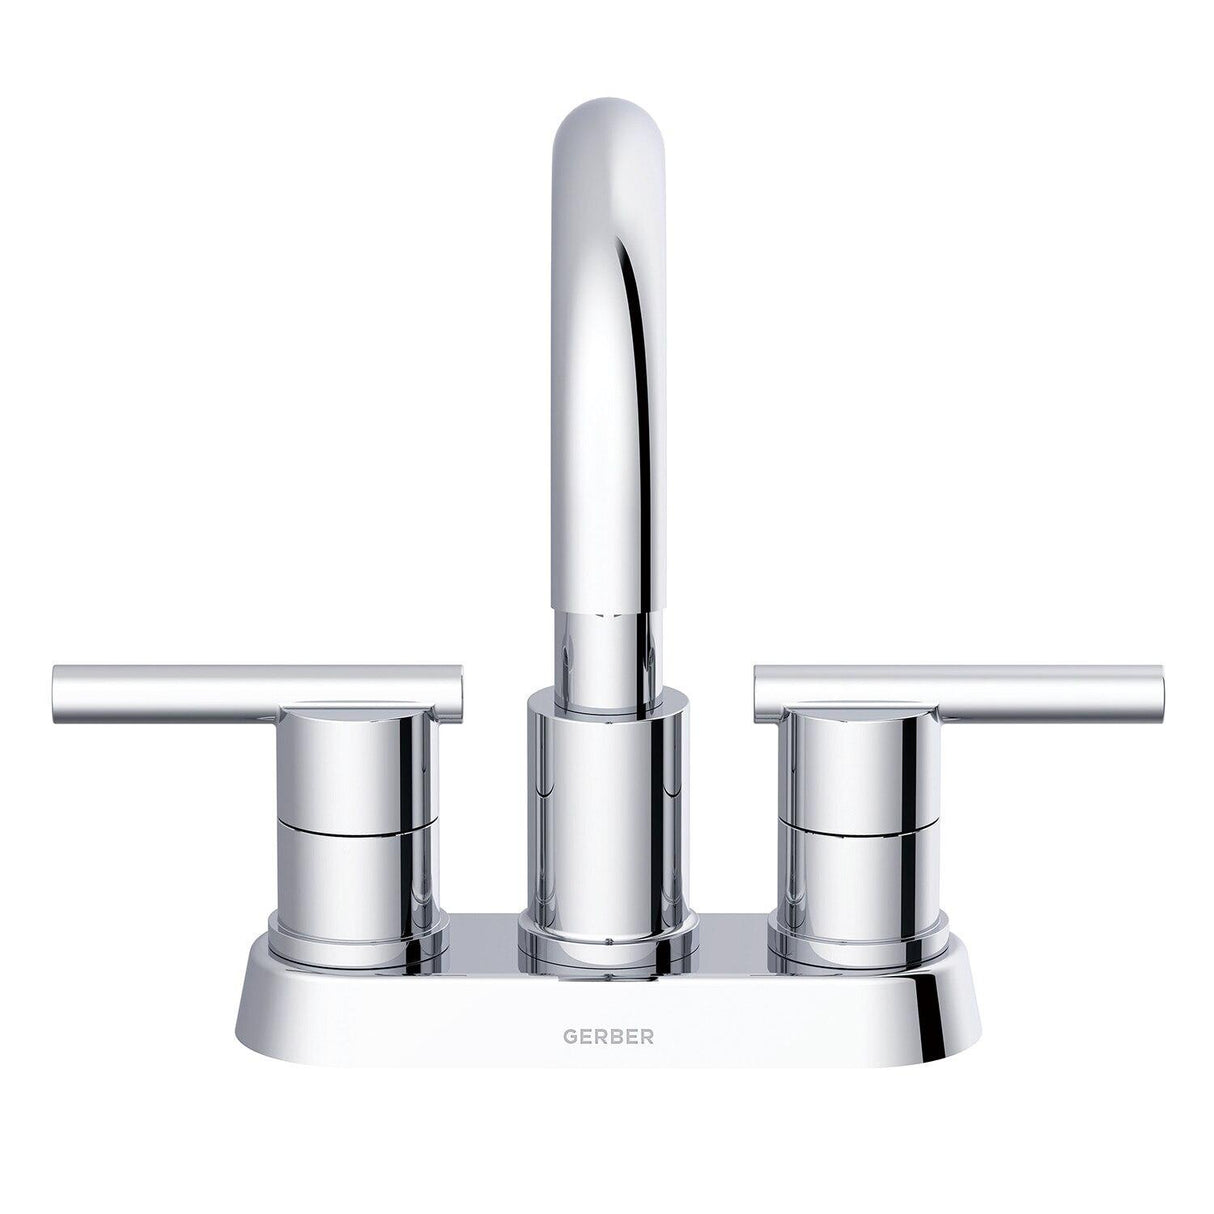 Gerber D307058 Parma Two Handle Centerset Bathroom Faucet With Metal Touch DOWN...